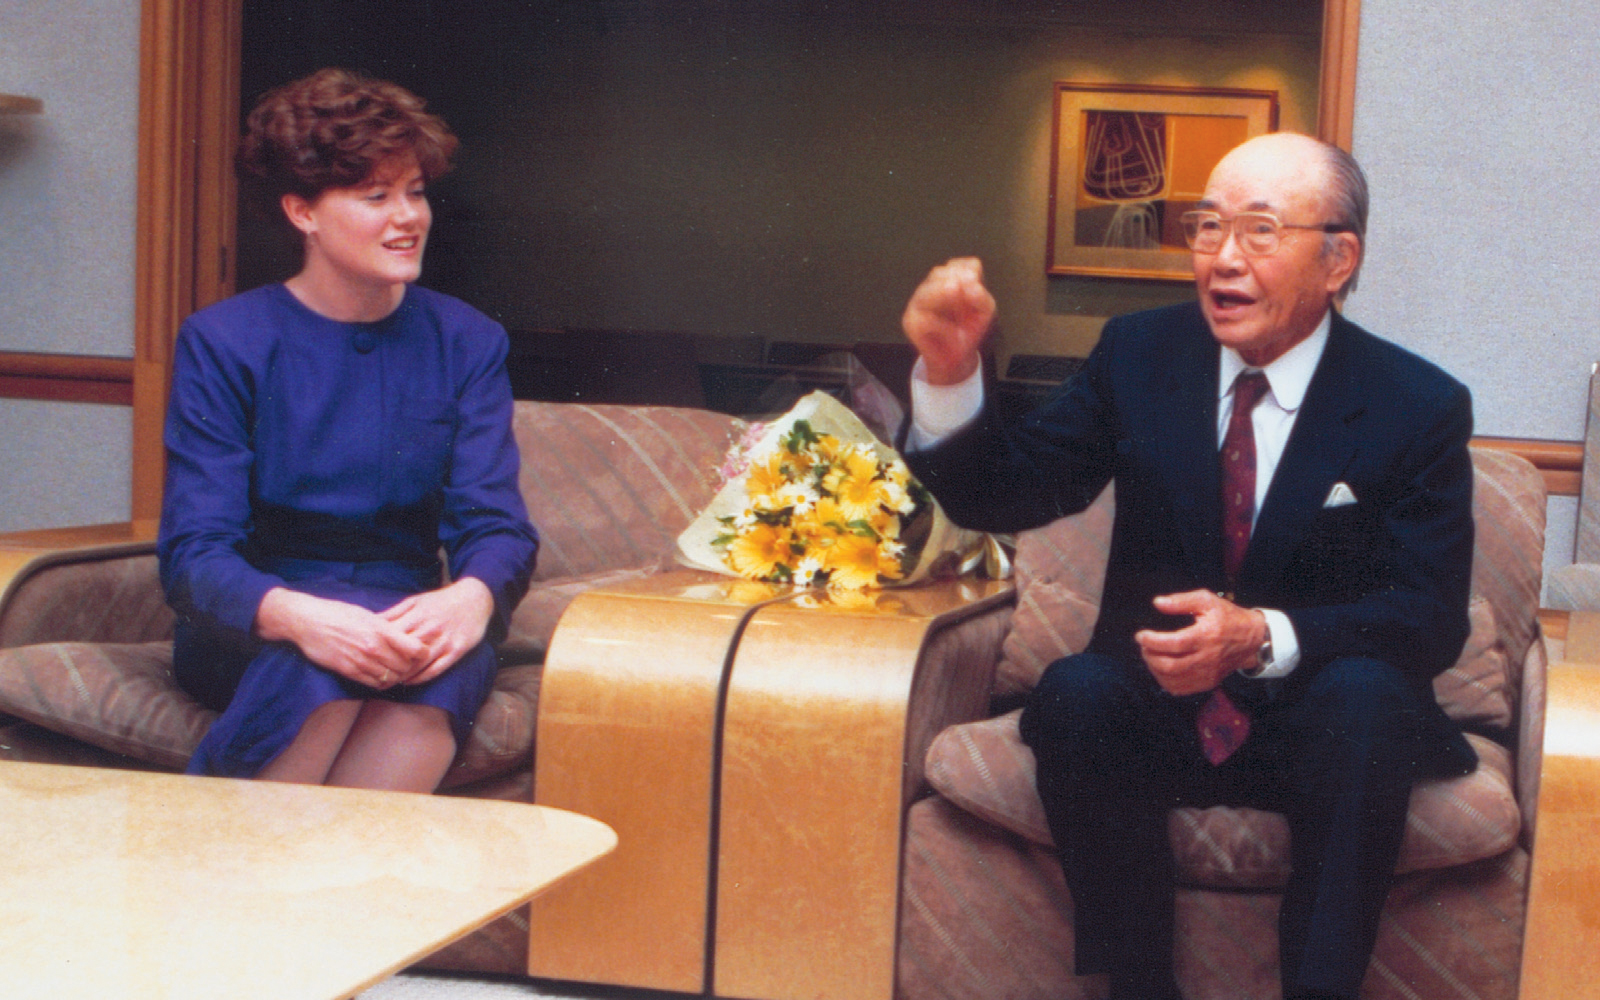 Kriska chats with Mr. Honda, in the post-polyester days.